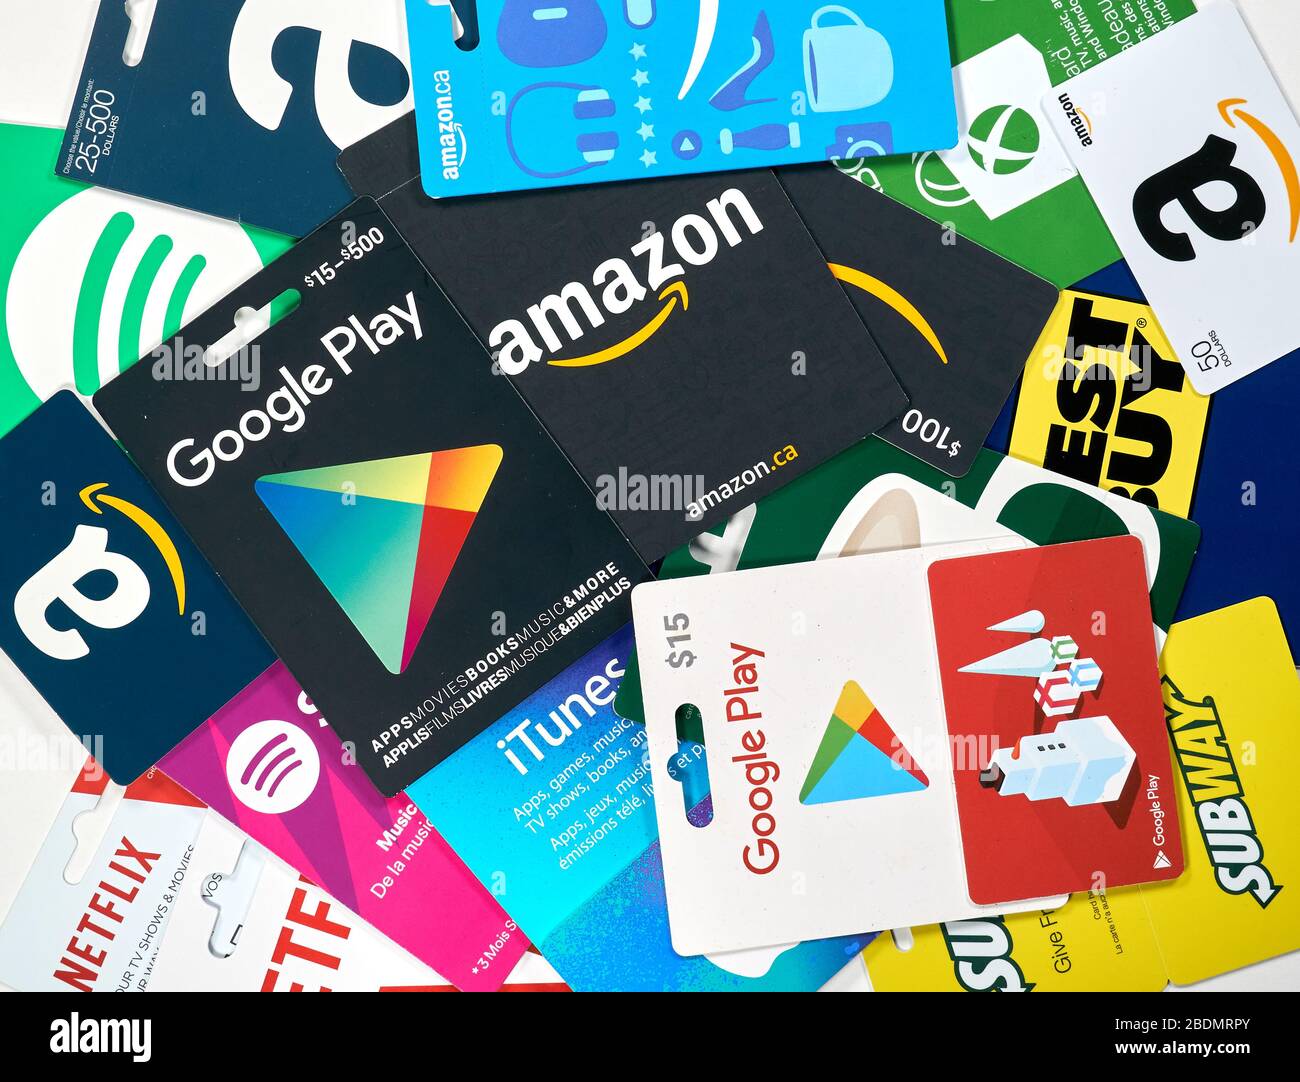 Amazon voucher hi-res stock photography and images - Alamy